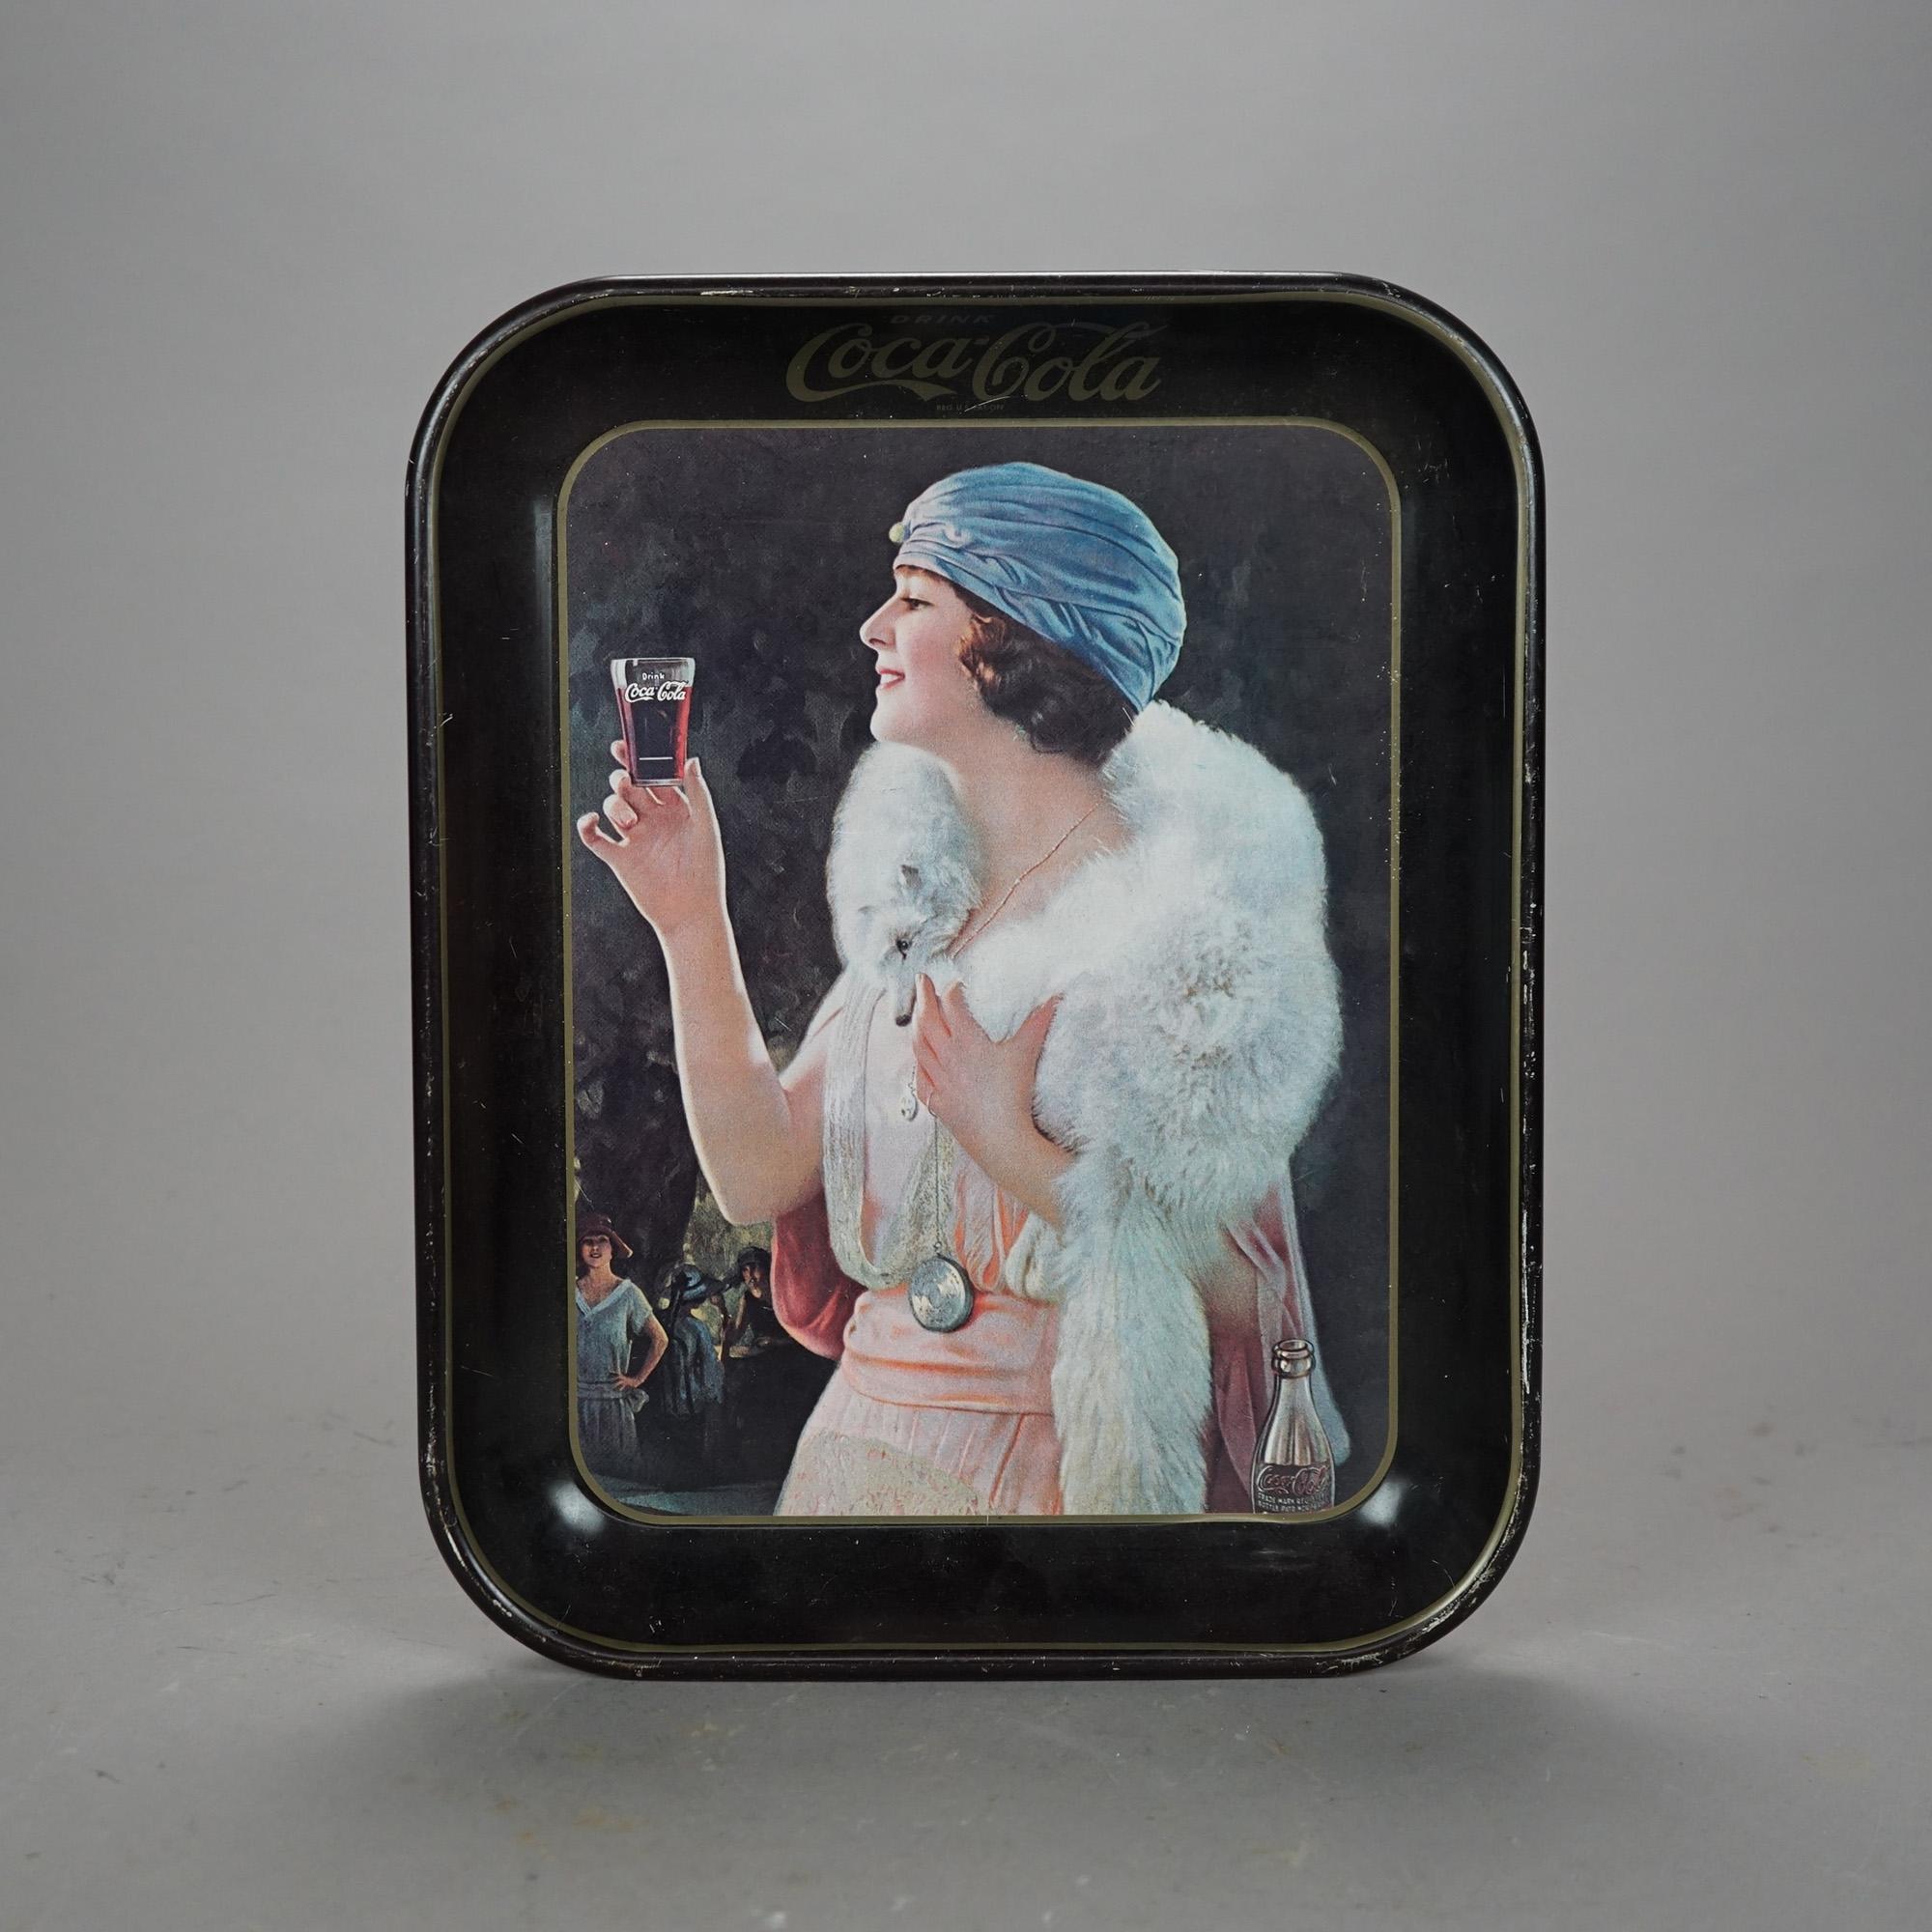 An vintage metal Coca-Cola advertising tray offers metal construction with woman with glass of coke, 20th century.

Measures- 1.25''H x 10.5''W x 13.5''D.

Catalogue Note: Ask about DISCOUNTED DELIVERY RATES available to most regions within 1,500